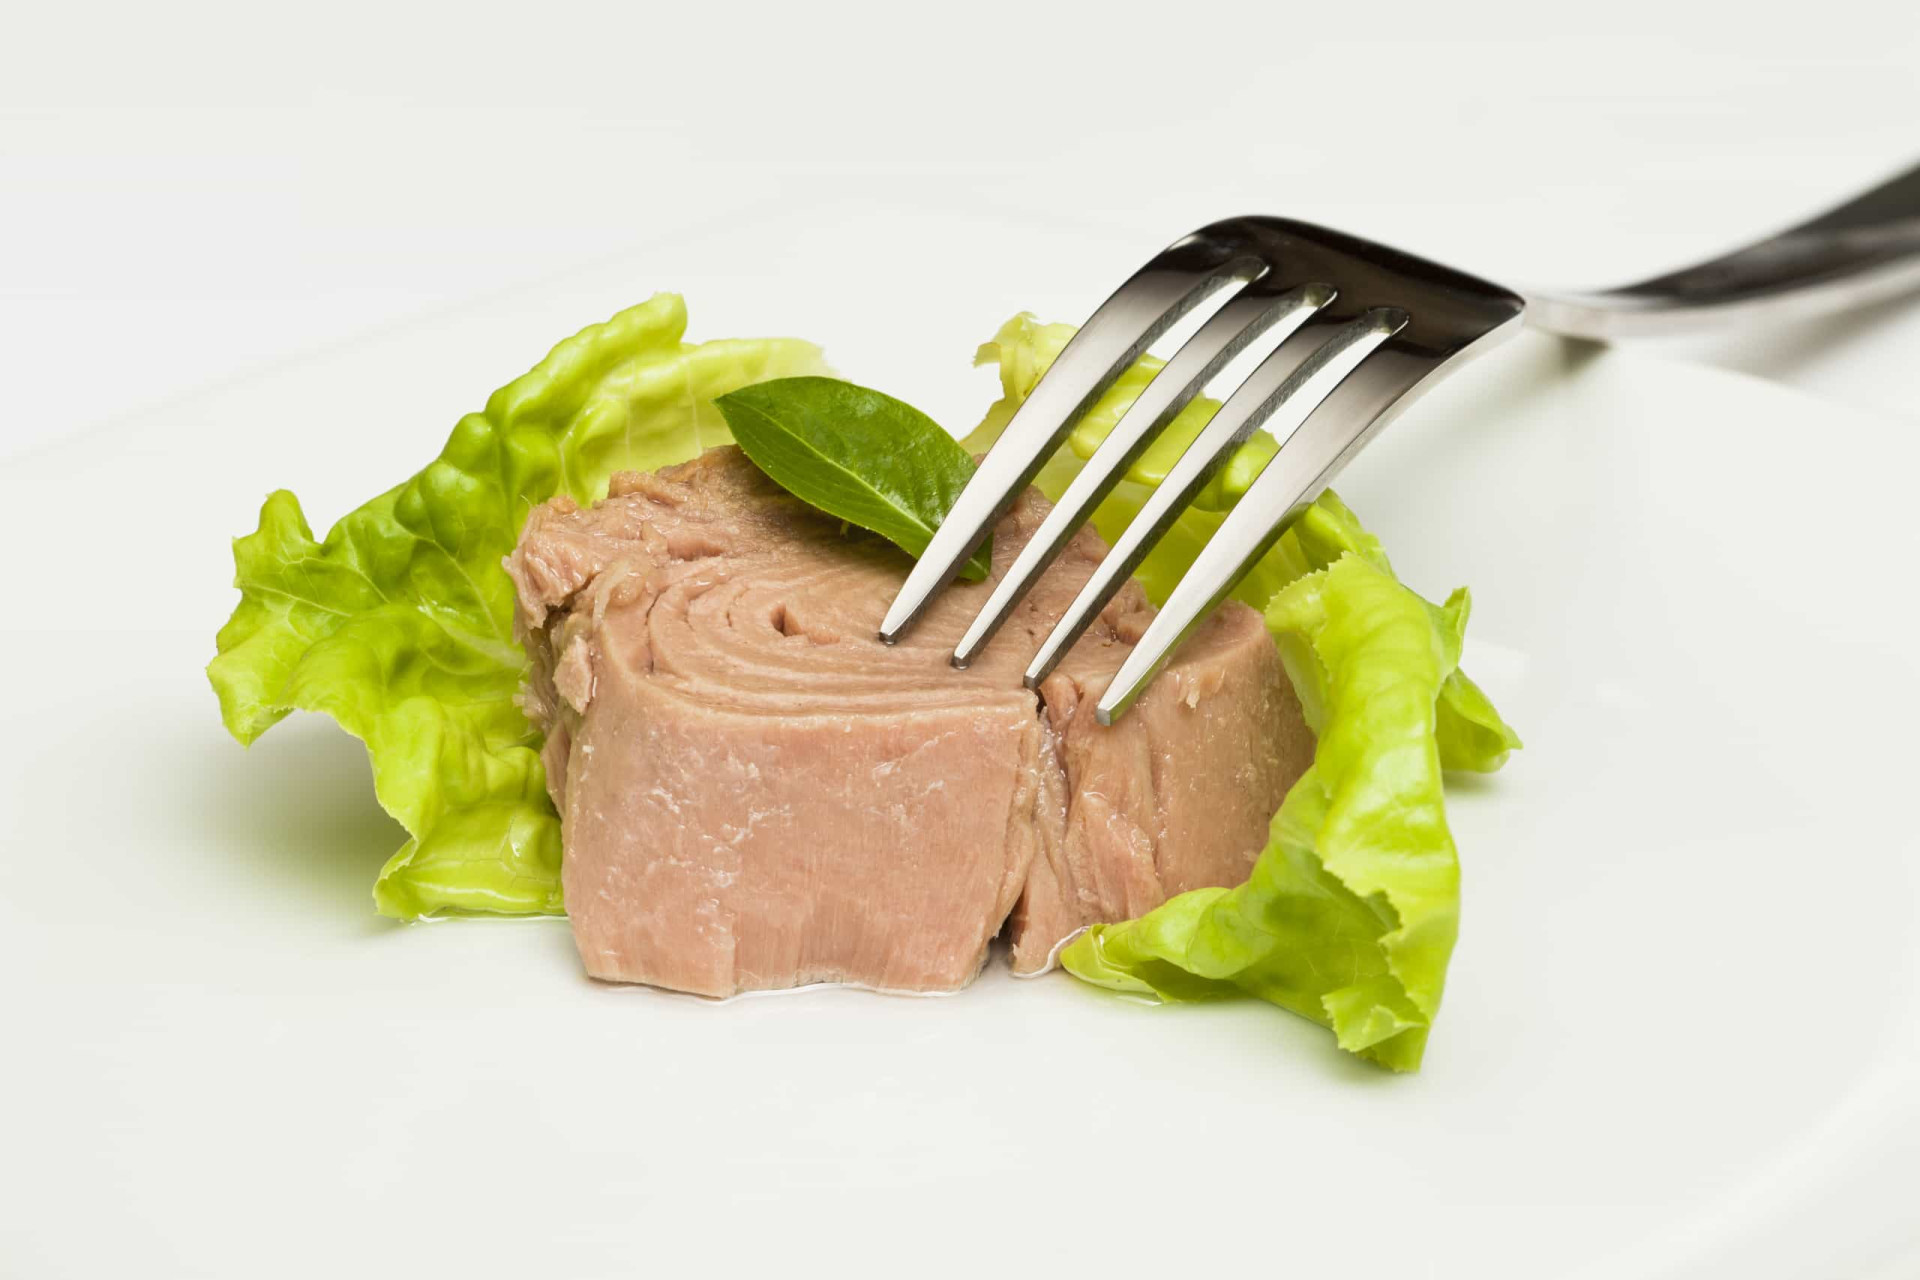 <p>When incorporating tuna into your diet, it is crucial to be cautious of mercury exposure. Consuming certain types of tuna in a single serving could exceed the recommended weekly limit for safe mercury consumption.</p><p><a href="https://www.msn.com/en-us/community/channel/vid-7xx8mnucu55yw63we9va2gwr7uihbxwc68fxqp25x6tg4ftibpra?cvid=94631541bc0f4f89bfd59158d696ad7e">Follow us and access great exclusive content every day</a></p>